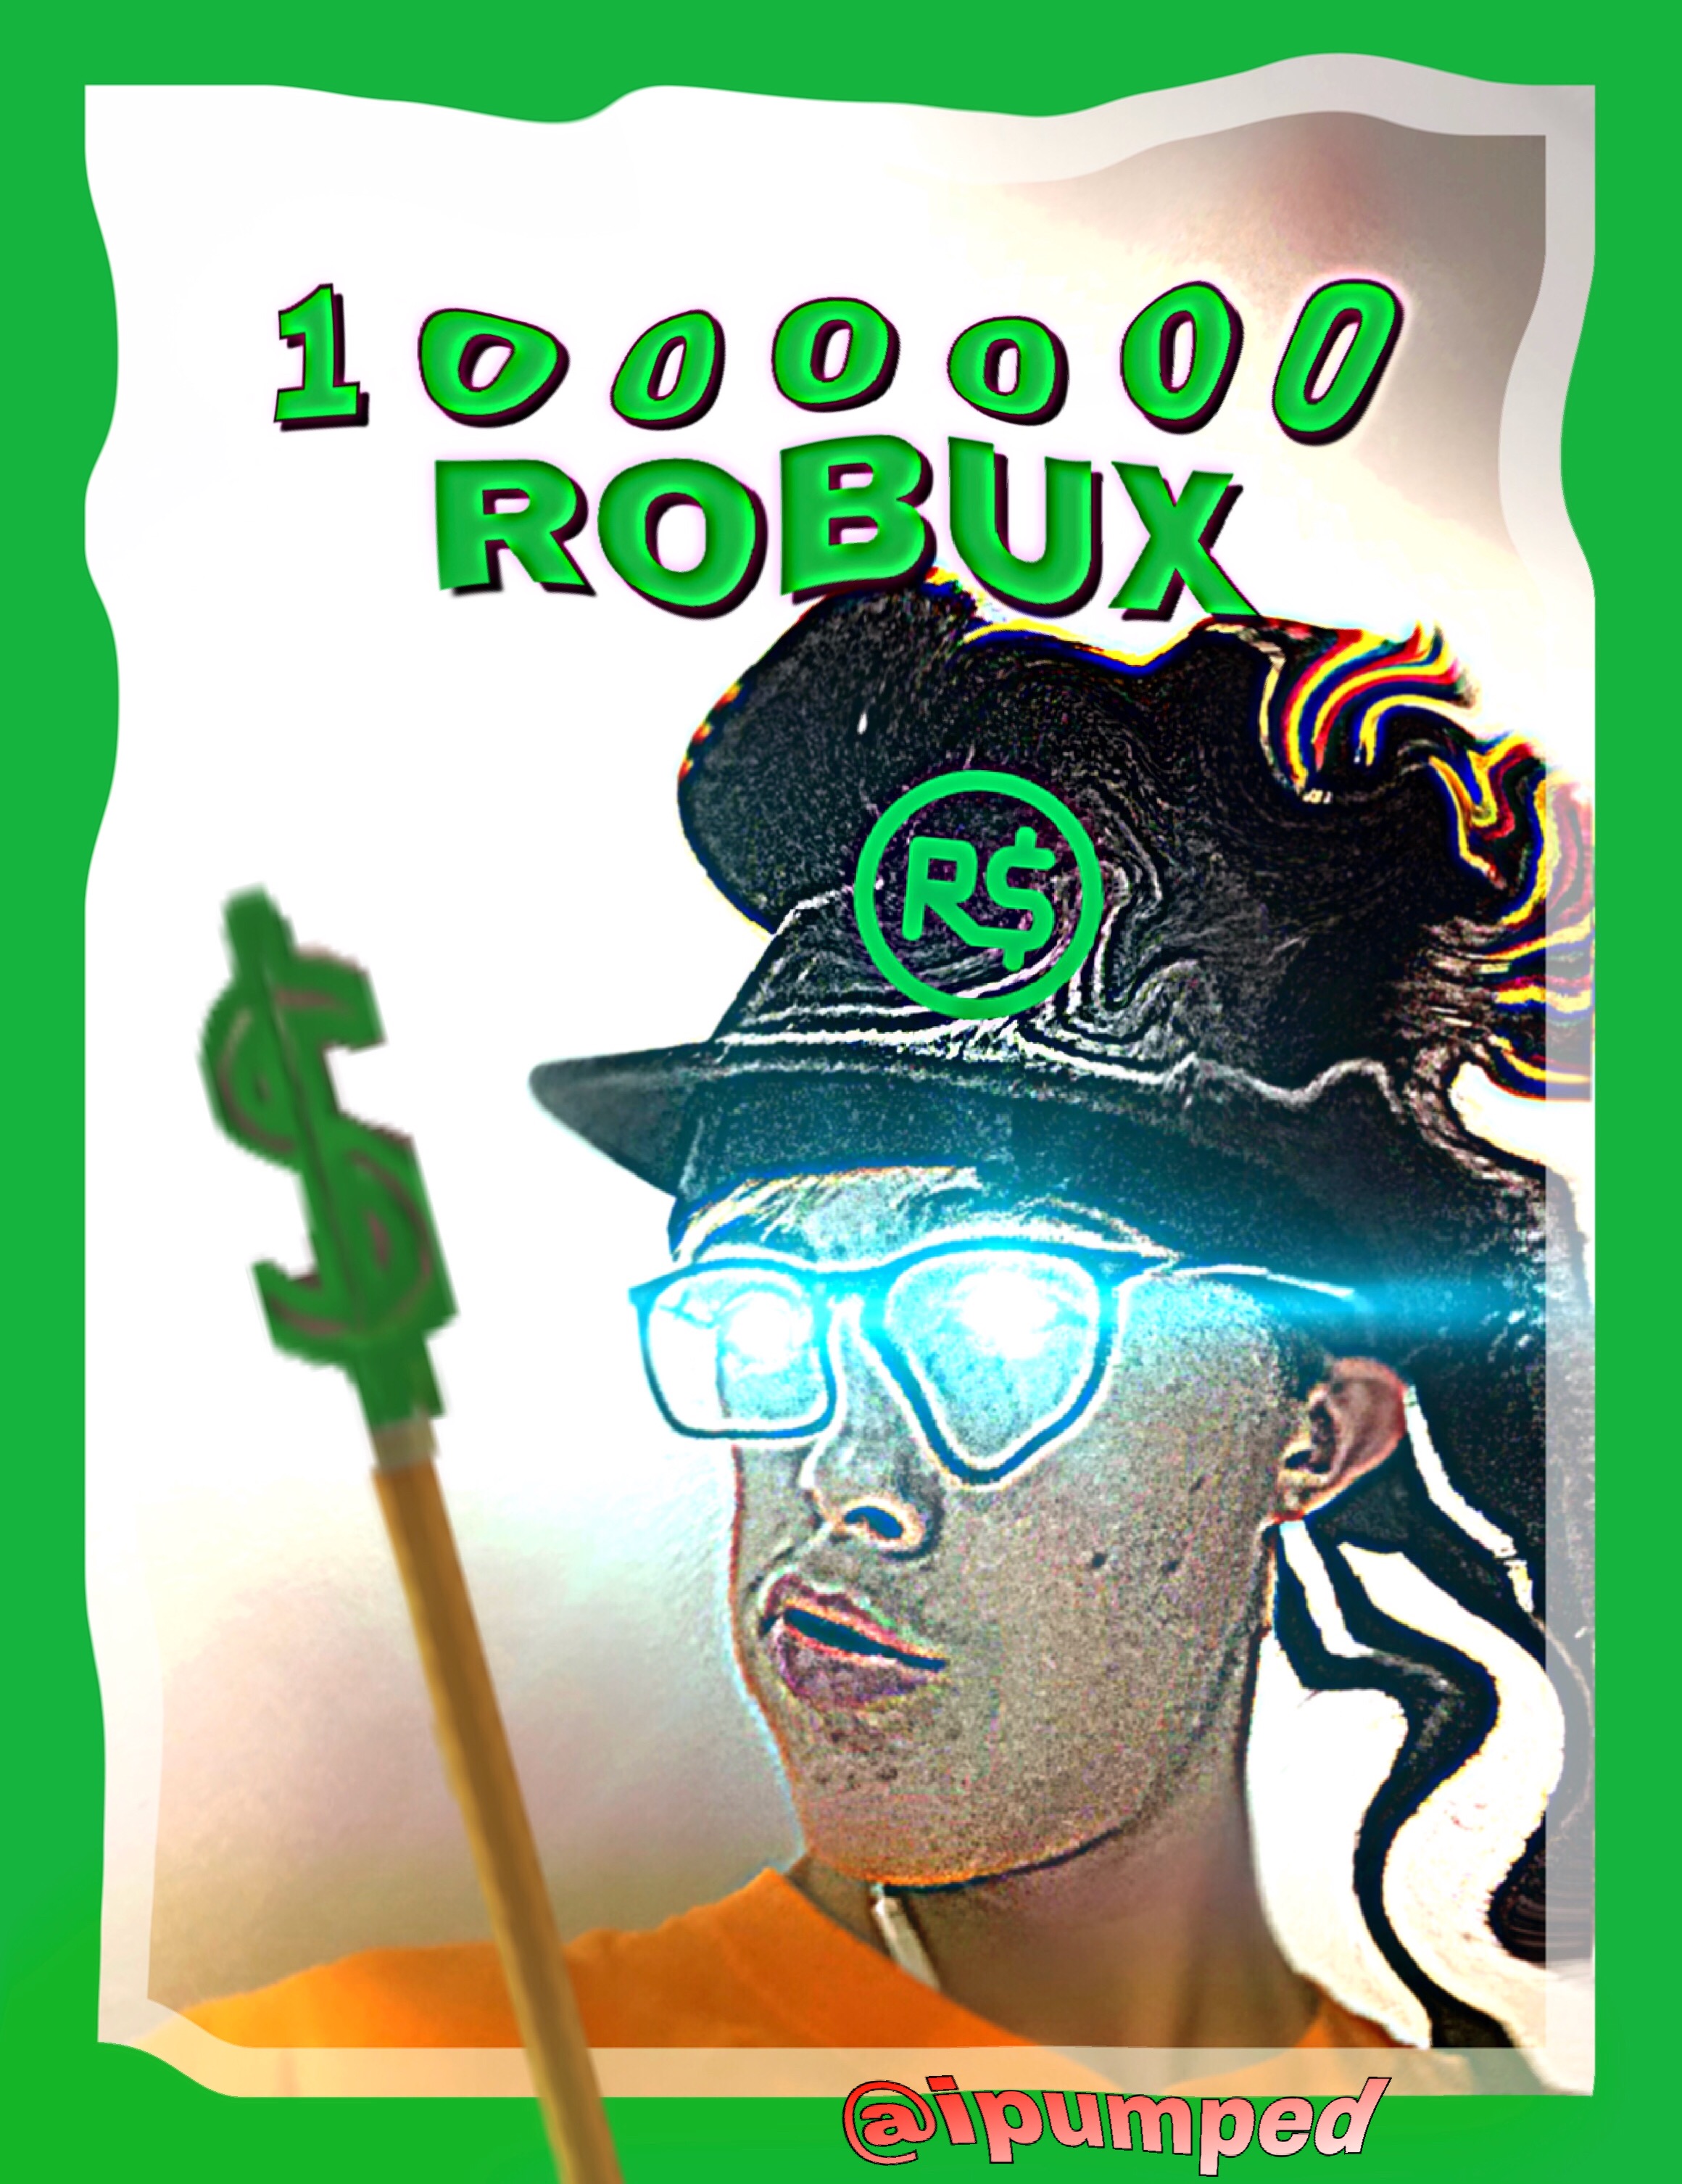 Meme Roblox Robux Ipumped Image By Ipumped - ipumped meme roblox robux deepfriedmemes